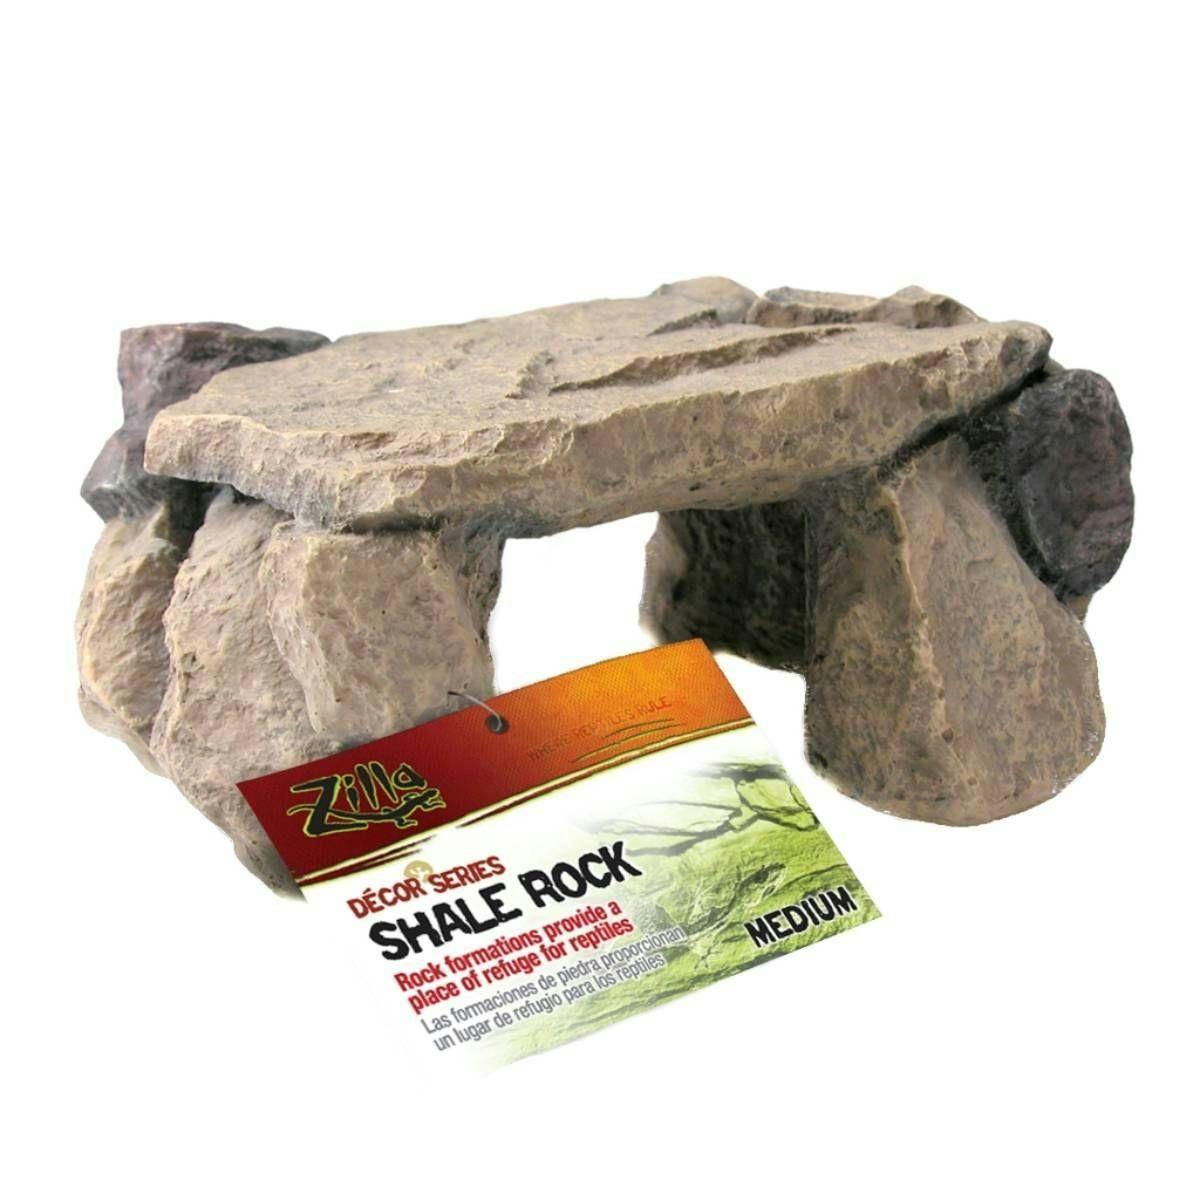 Image for Zilla Shale Rock Den by Josh's Frogs